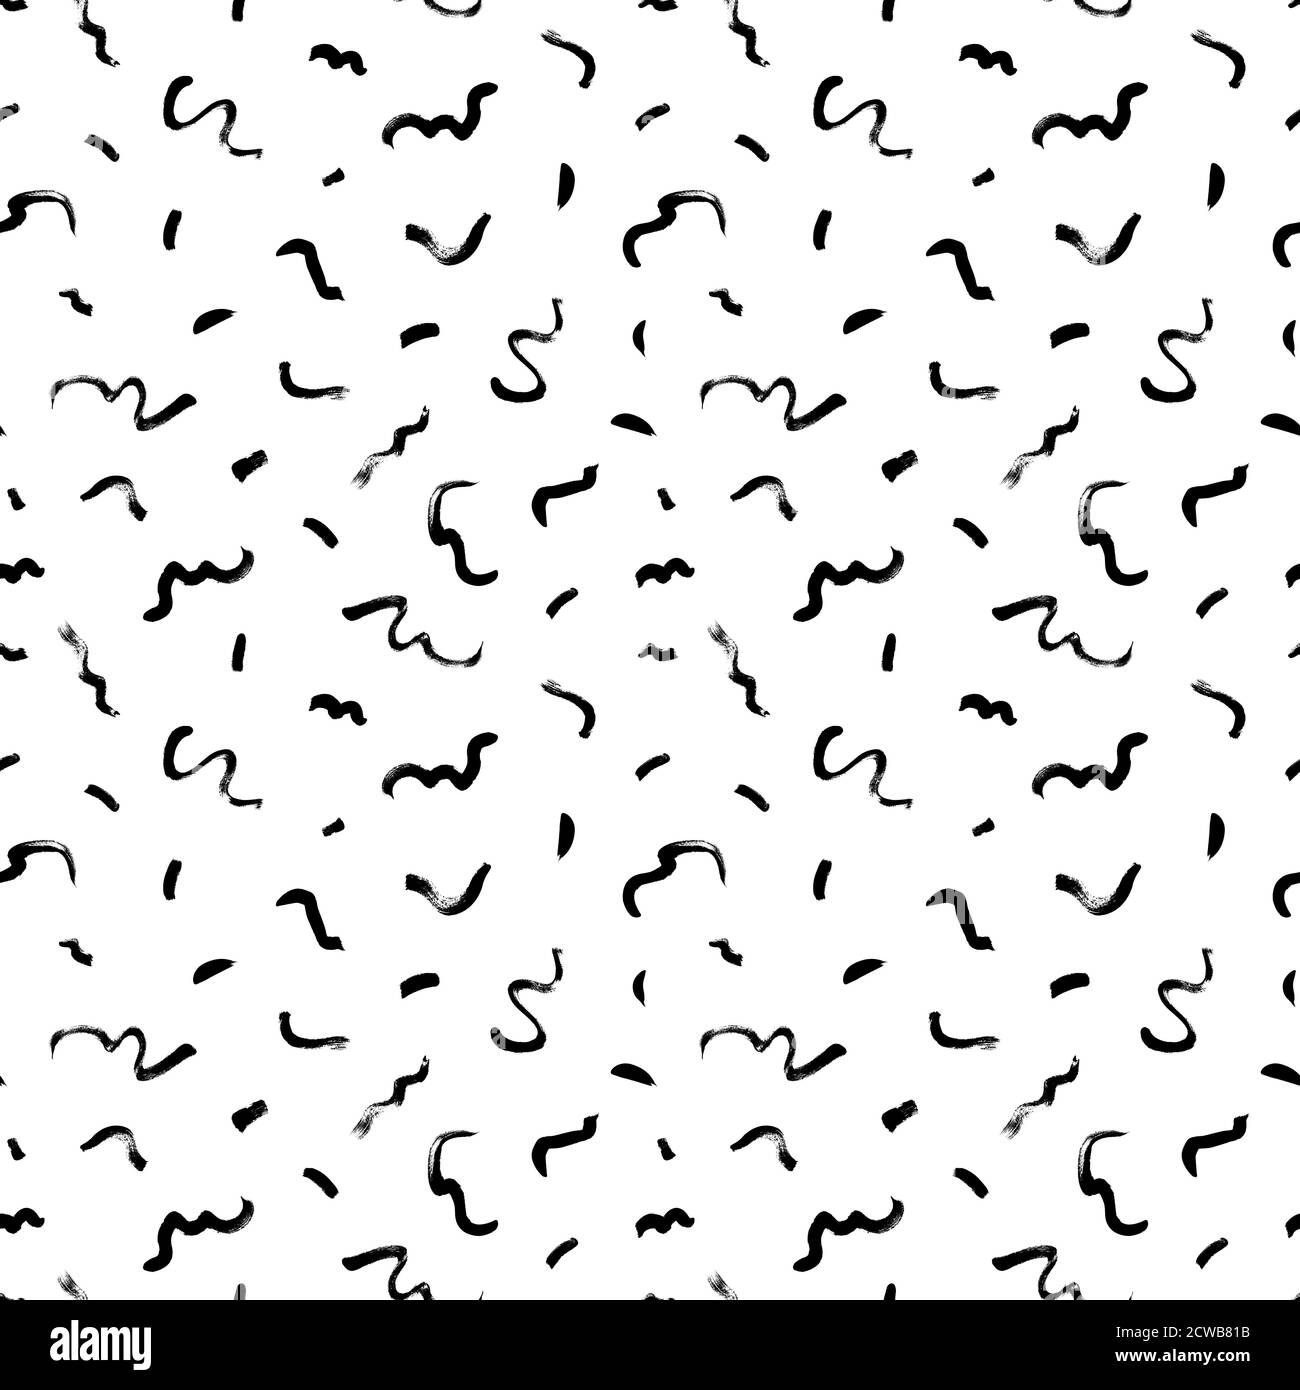 Black freehand scribbles vector seamless pattern.  Stock Vector